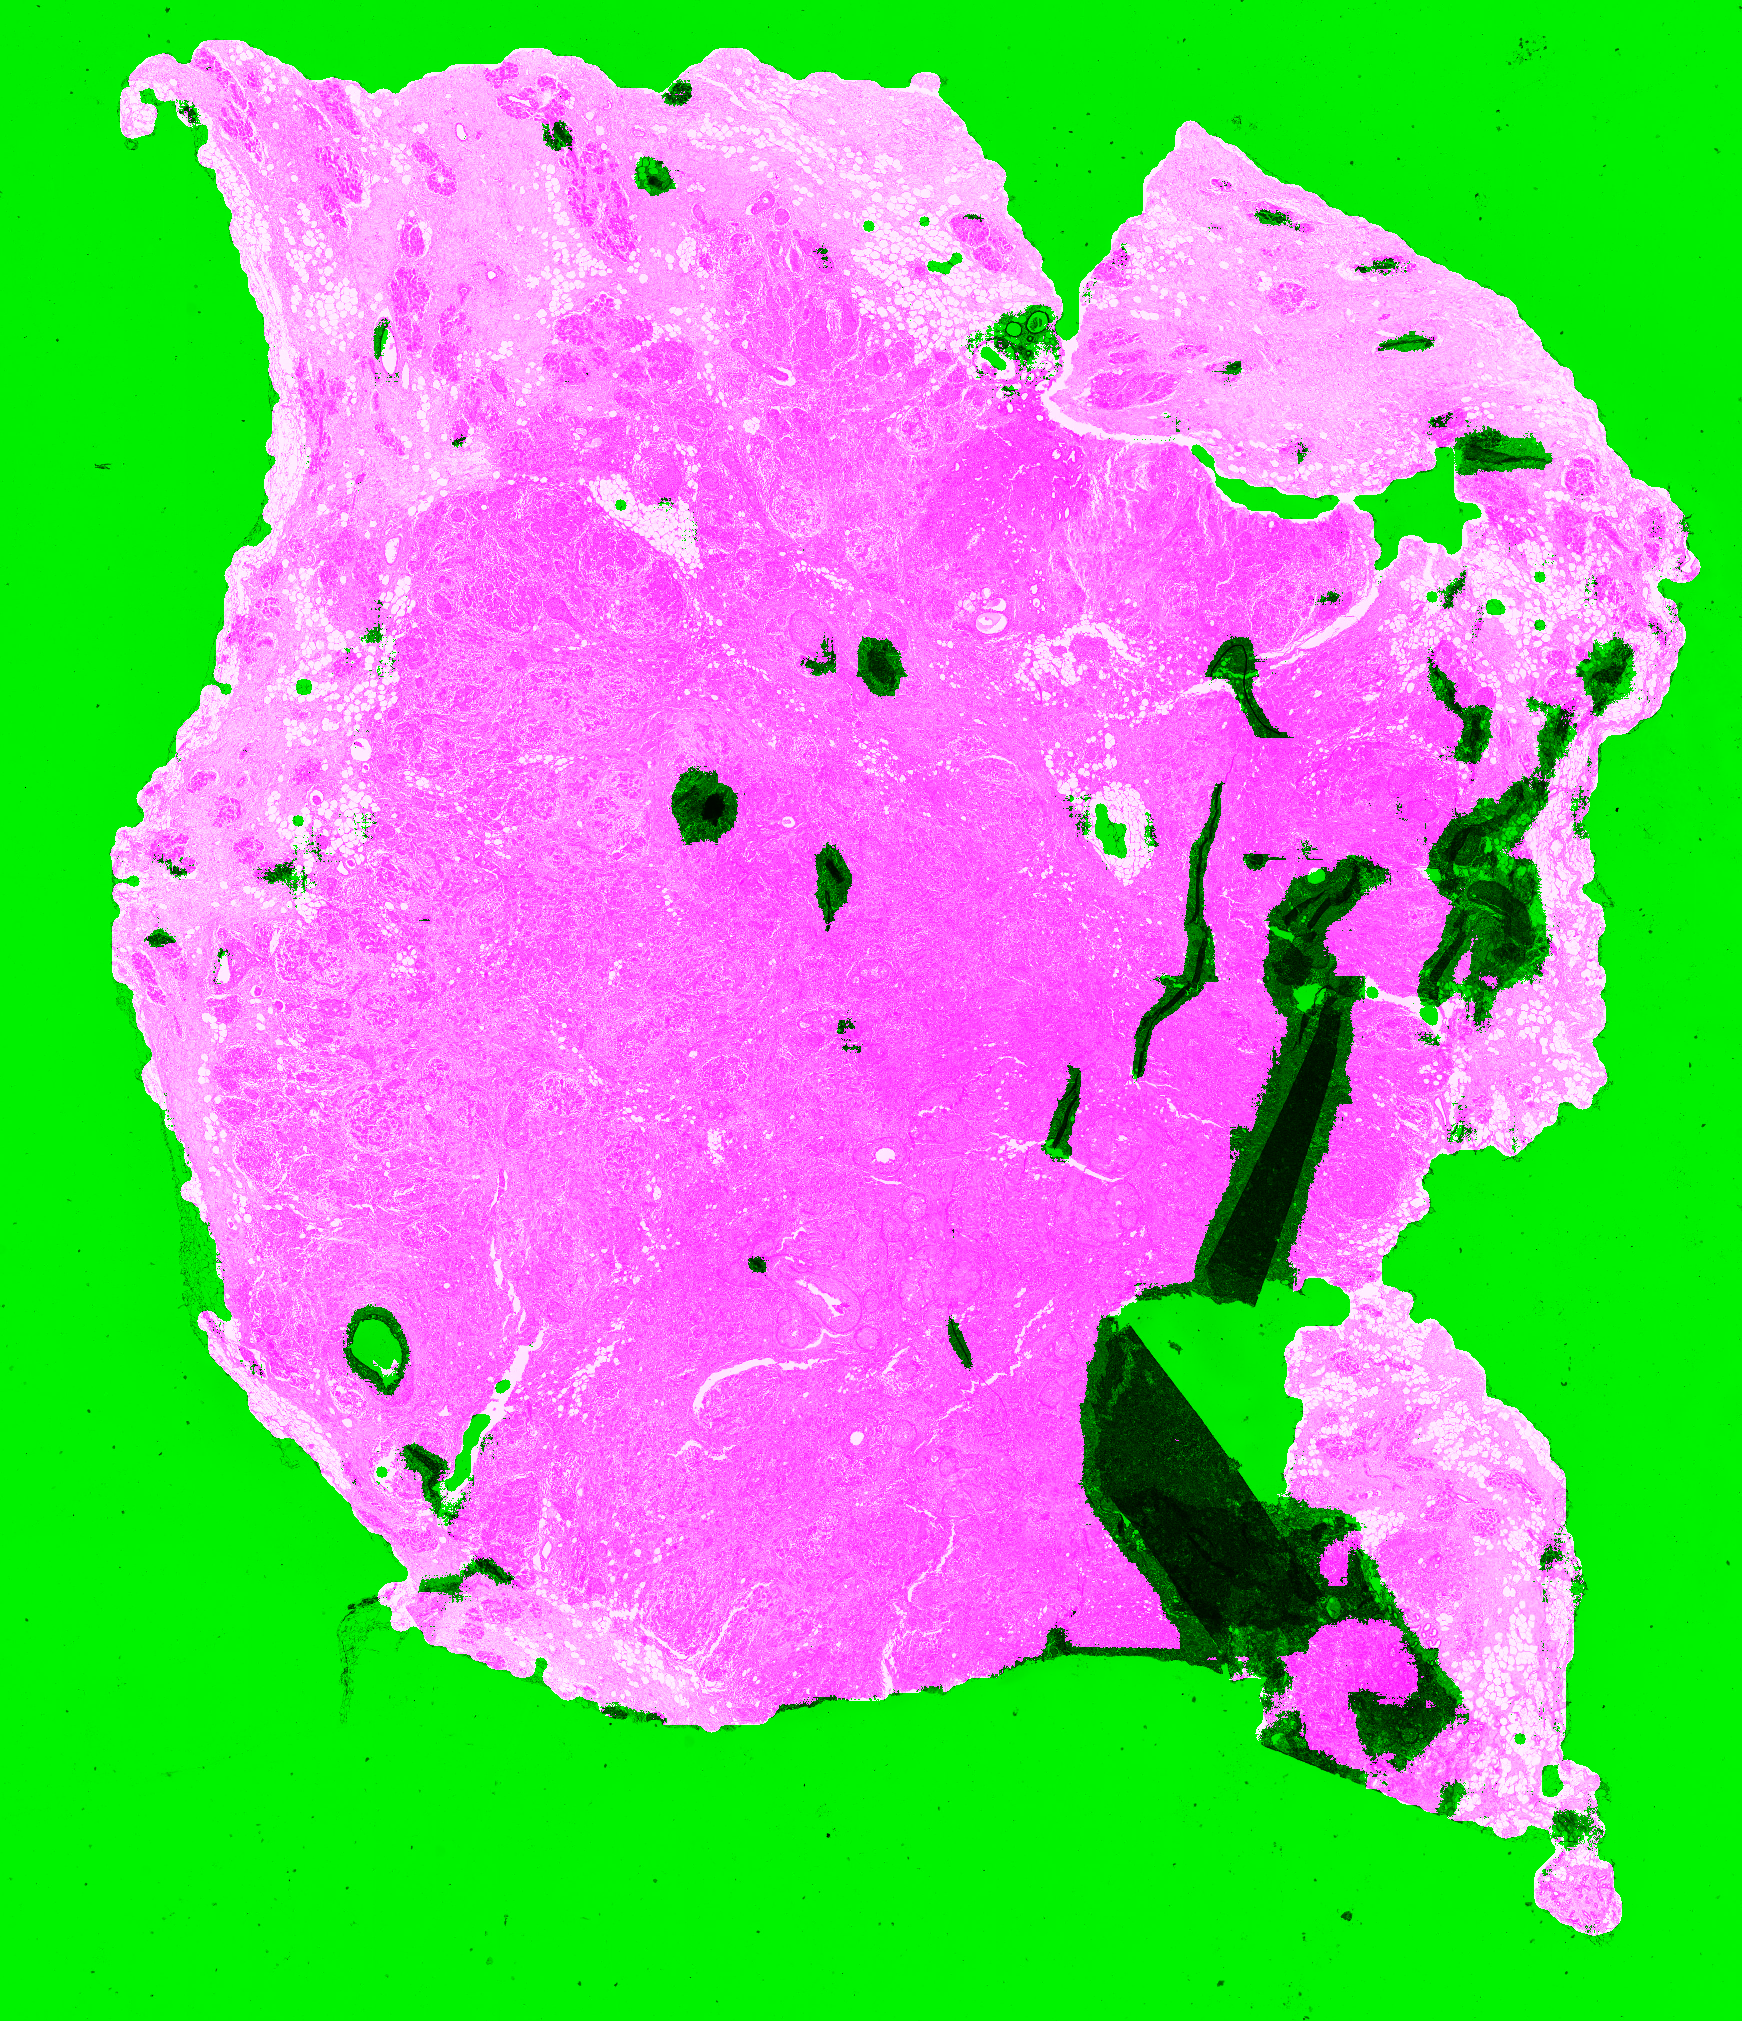 Figure 6.14. Prediction of artefactual regions of the PAN-GA50 network on the TCGA D8-A141 slide. Detected artefacts and background are shown in green, normal tissue is shown in pink.